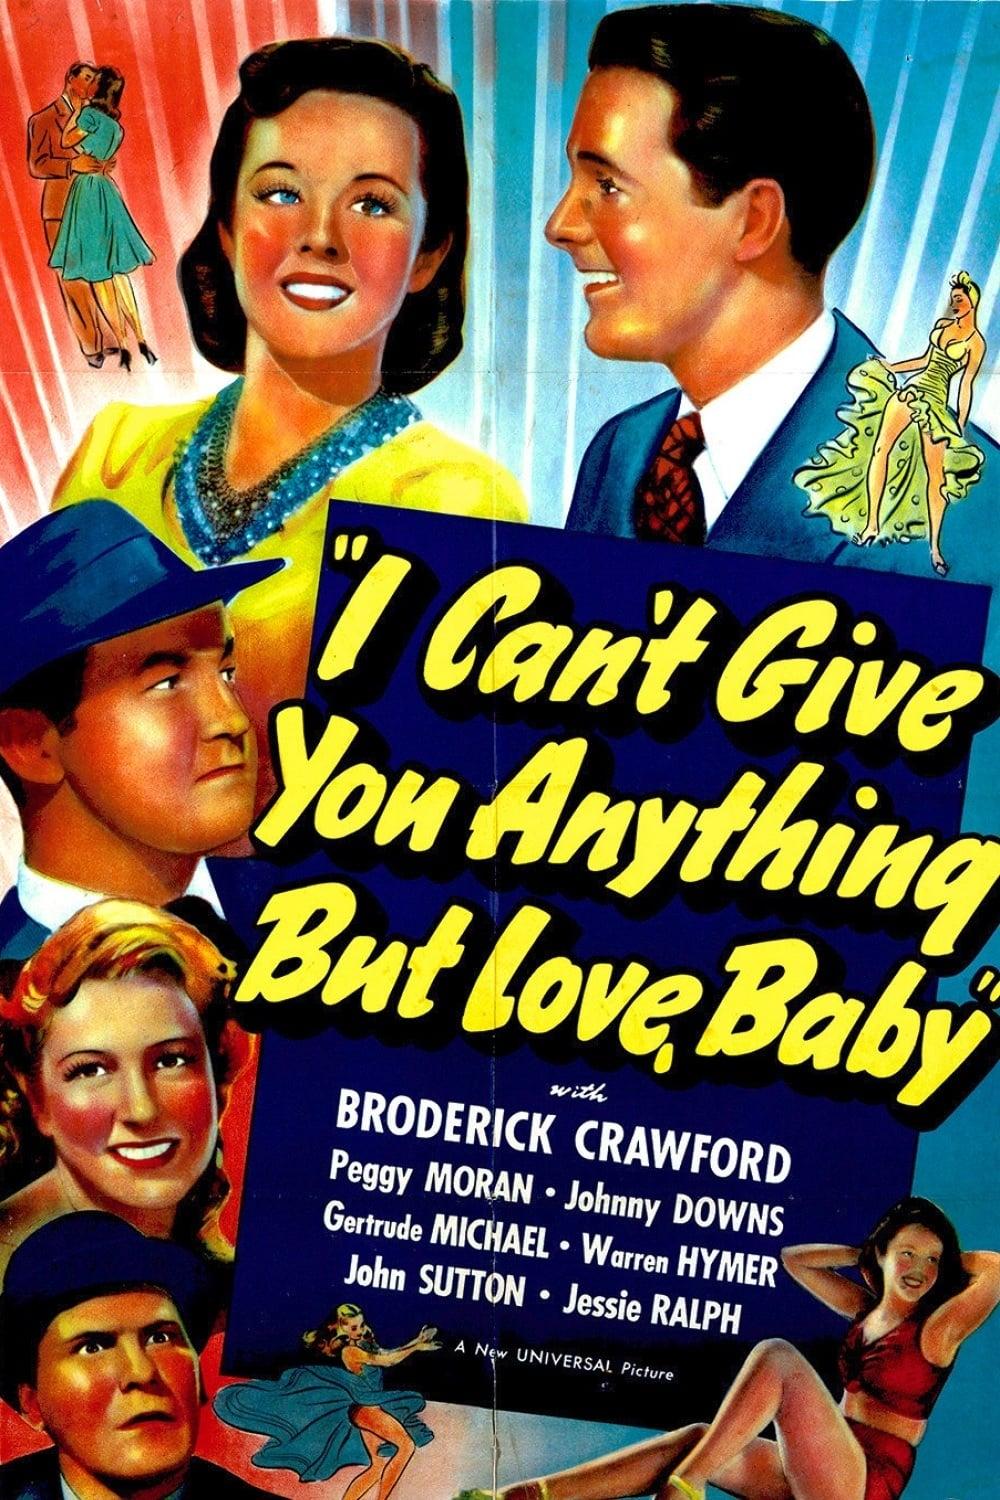 I Can't Give You Anything But Love, Baby poster